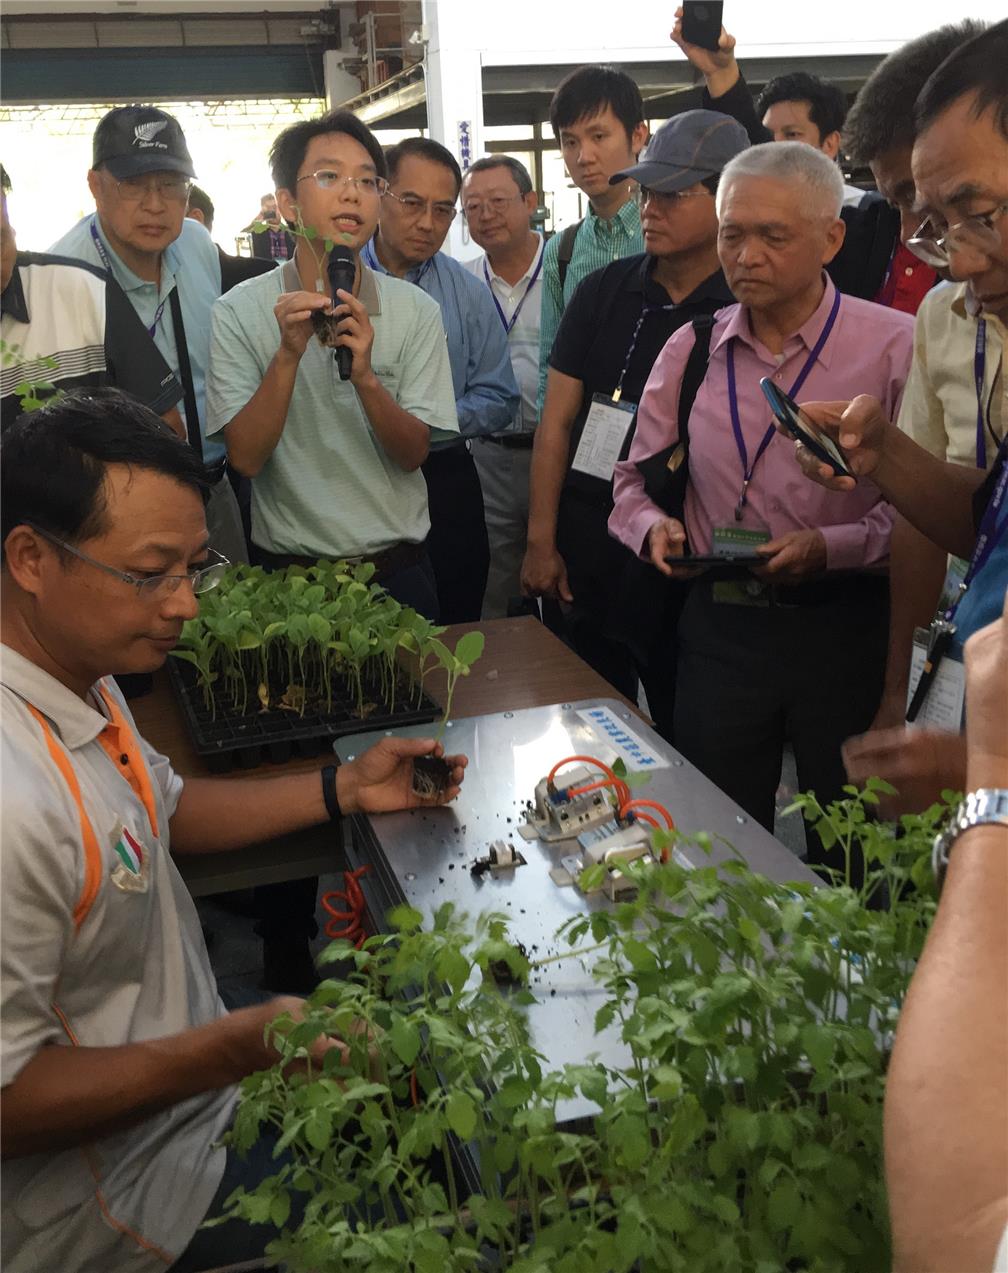 A visit to Taichung District Agricultural Research and Extension Station